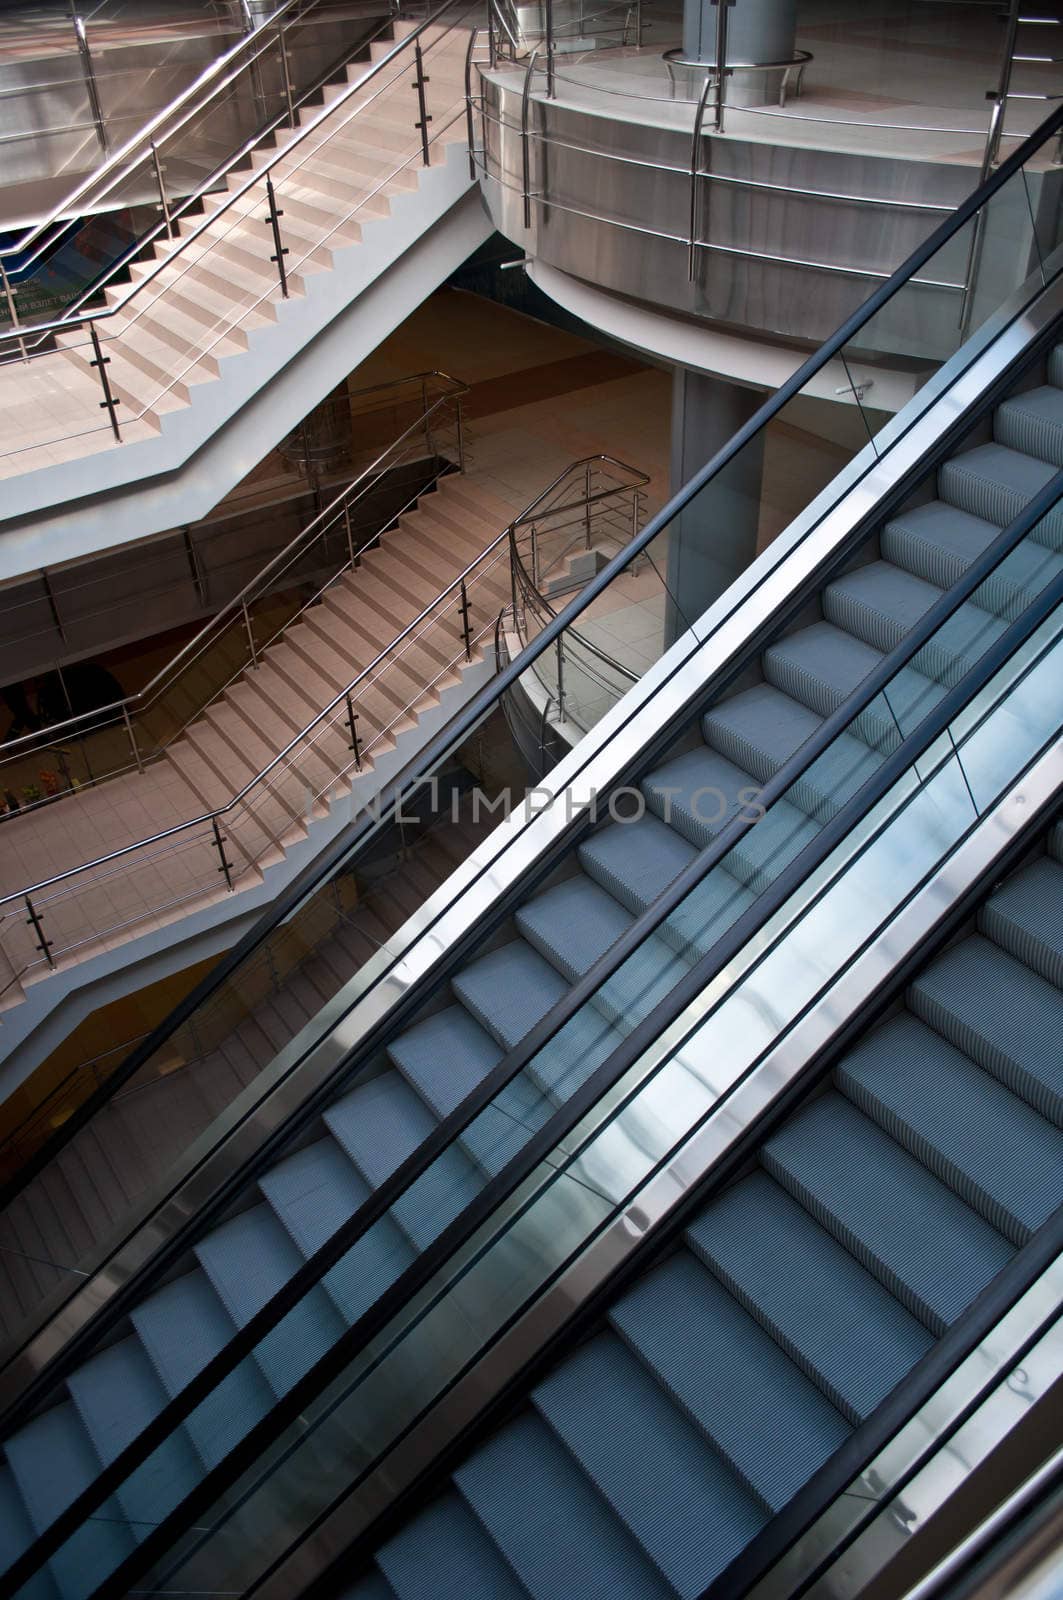 escalators and stairs in a modern office building by vlaru